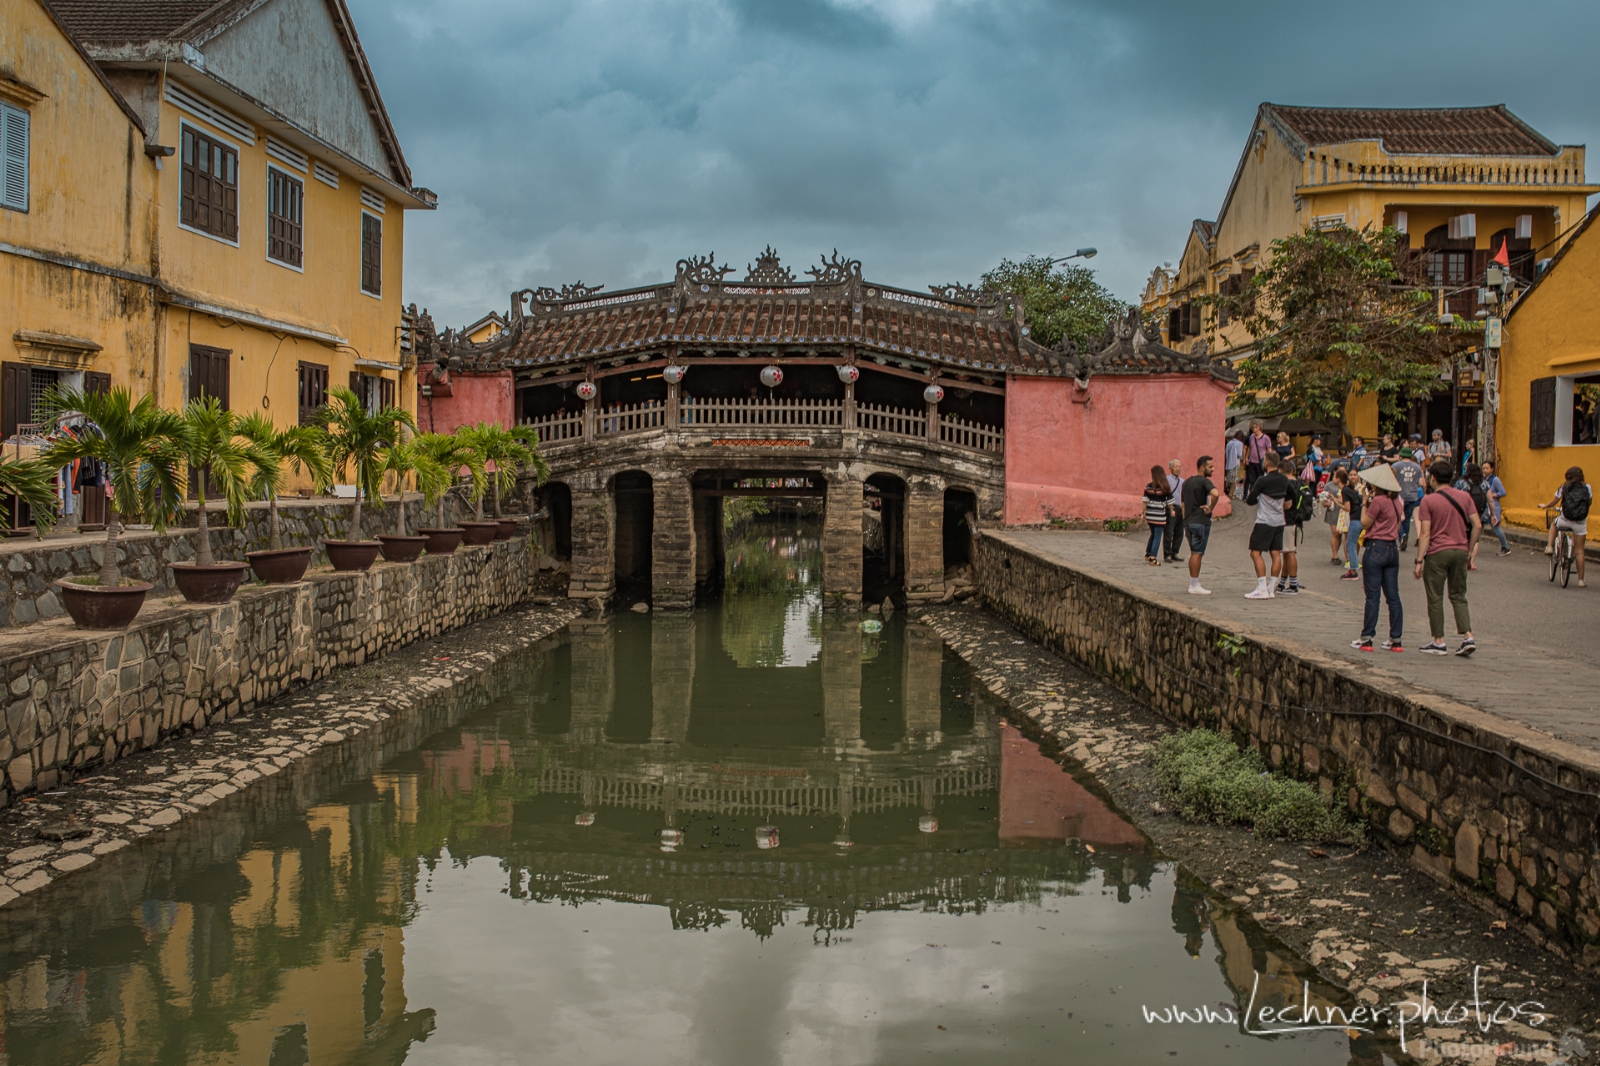 Image of Japanese Bridge in Hoi An by Florian Lechner